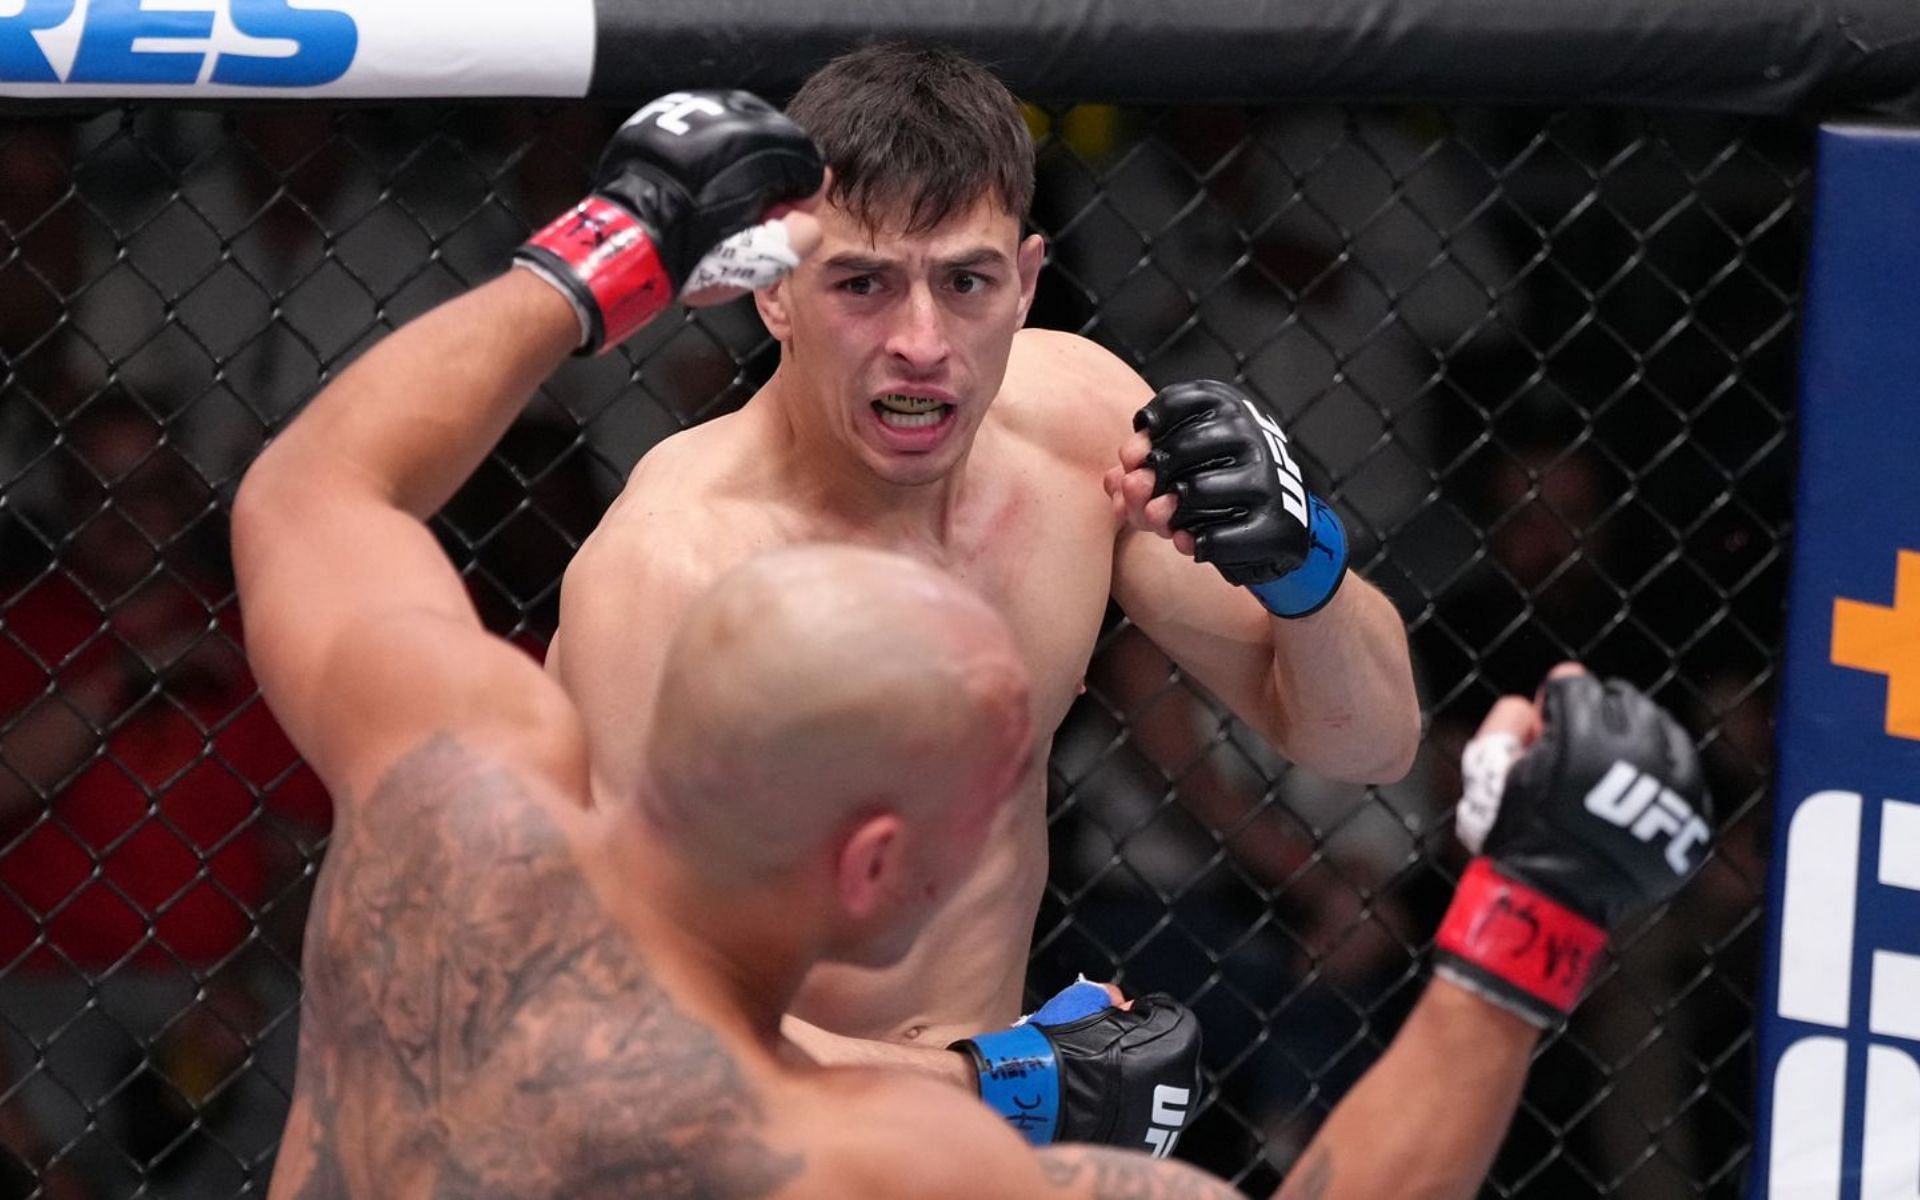 Manuel Torres made an explosive UFC debut by knocking out Frank Camacho